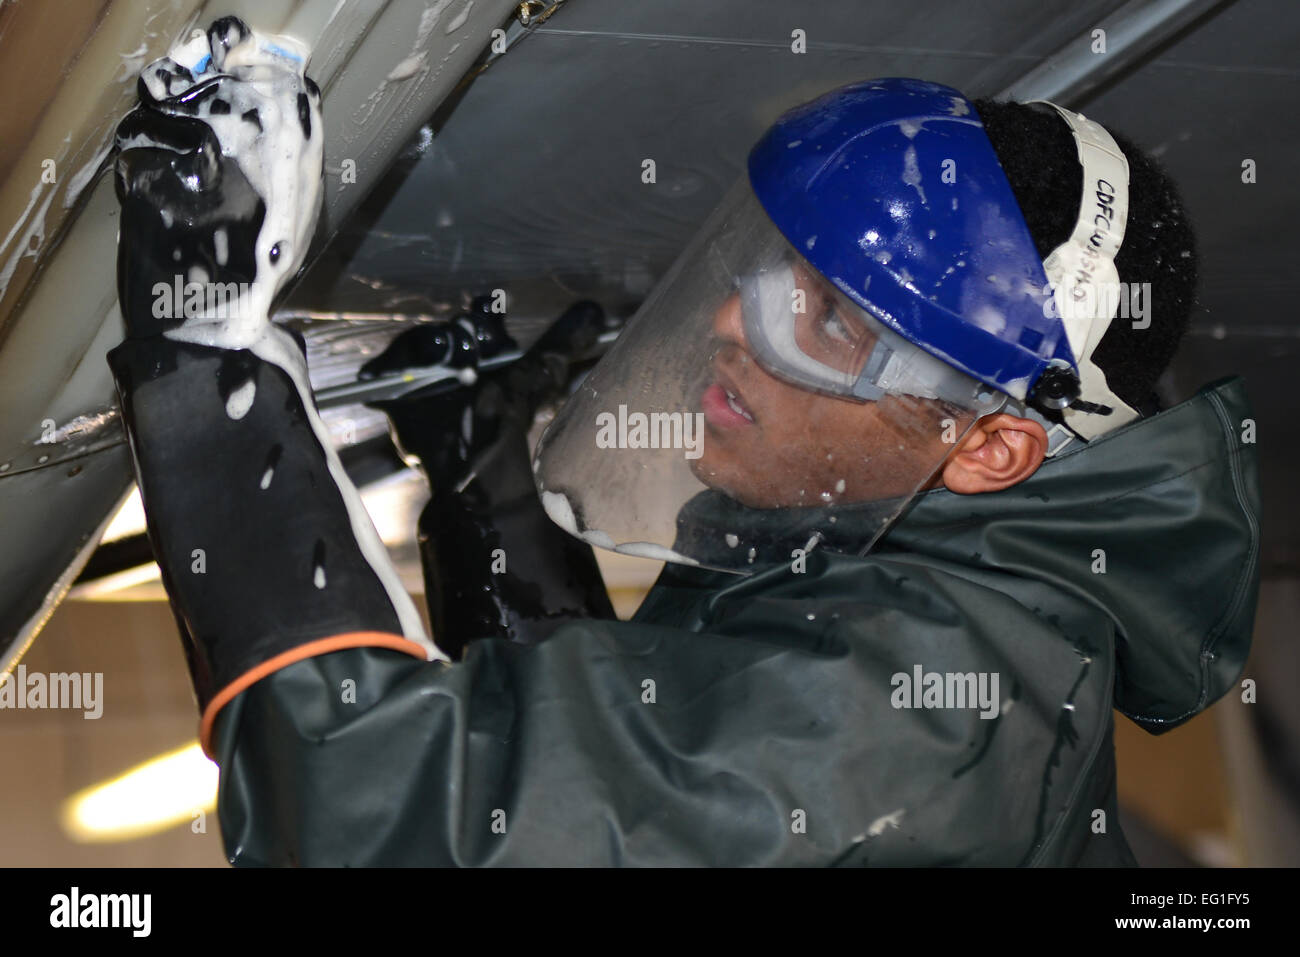 A maintainer from the 27th Special Operations Aircraft Maintenance Squadron scrubs beneath the wing of an MC-130J Commando II Dec. 18, 2014, at Cannon Air Force Base, N.M. Maintainers can spend hours washing an aircraft to ensure it is free of debris and safe from deterioration.  Airman 1st Class Shelby Kay-Fantozzi  For more great Air Force photos, visit our Facebook page: www.facebook.com/usairforce  https://www.facebook.com/USairforce  . Stock Photo